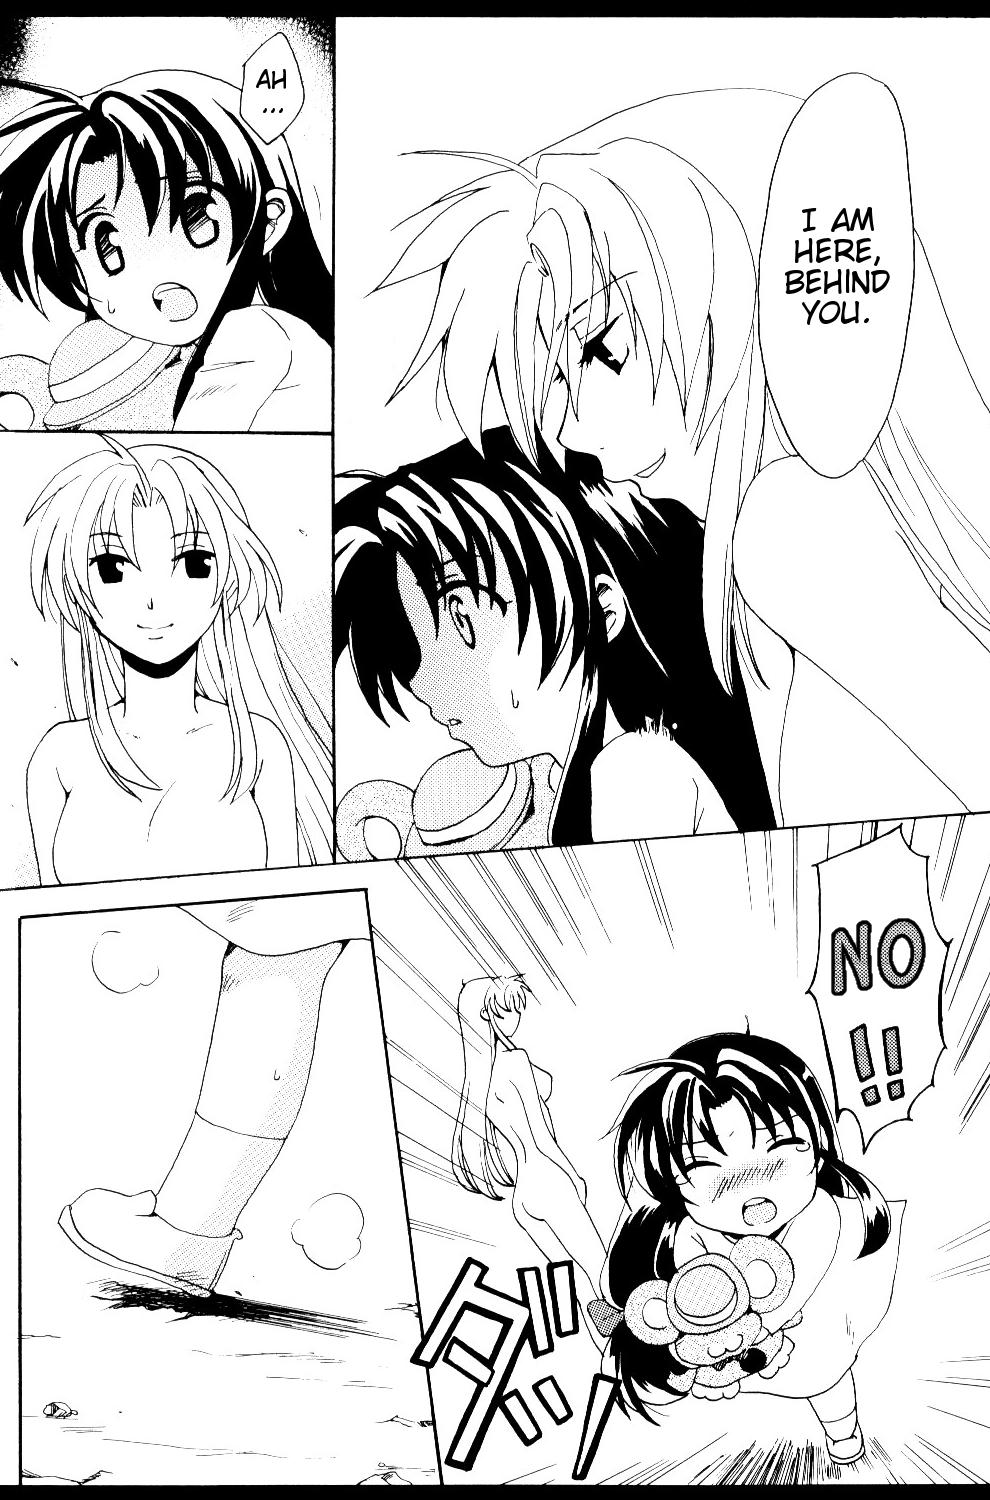 Rimming Misomeru Futari | The Two Who Fall in Love at First Sight - Full metal panic Oriental - Page 5